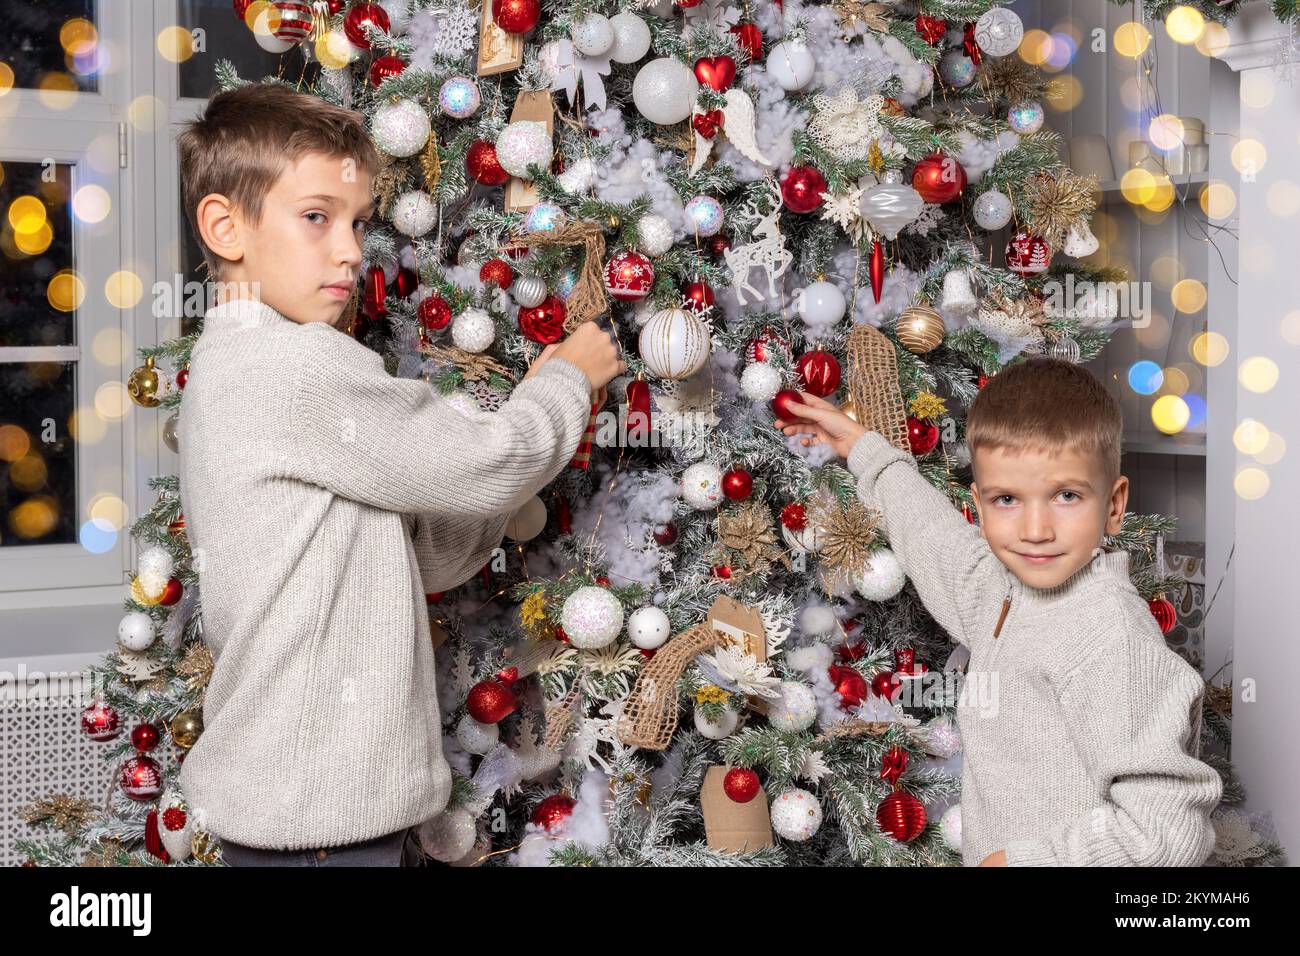 Cute cheerful children, boys decorate a Christmas tree, hang balls, garlands. The brothers decorate the house for the New Year and Christmas holidays. Stock Photo